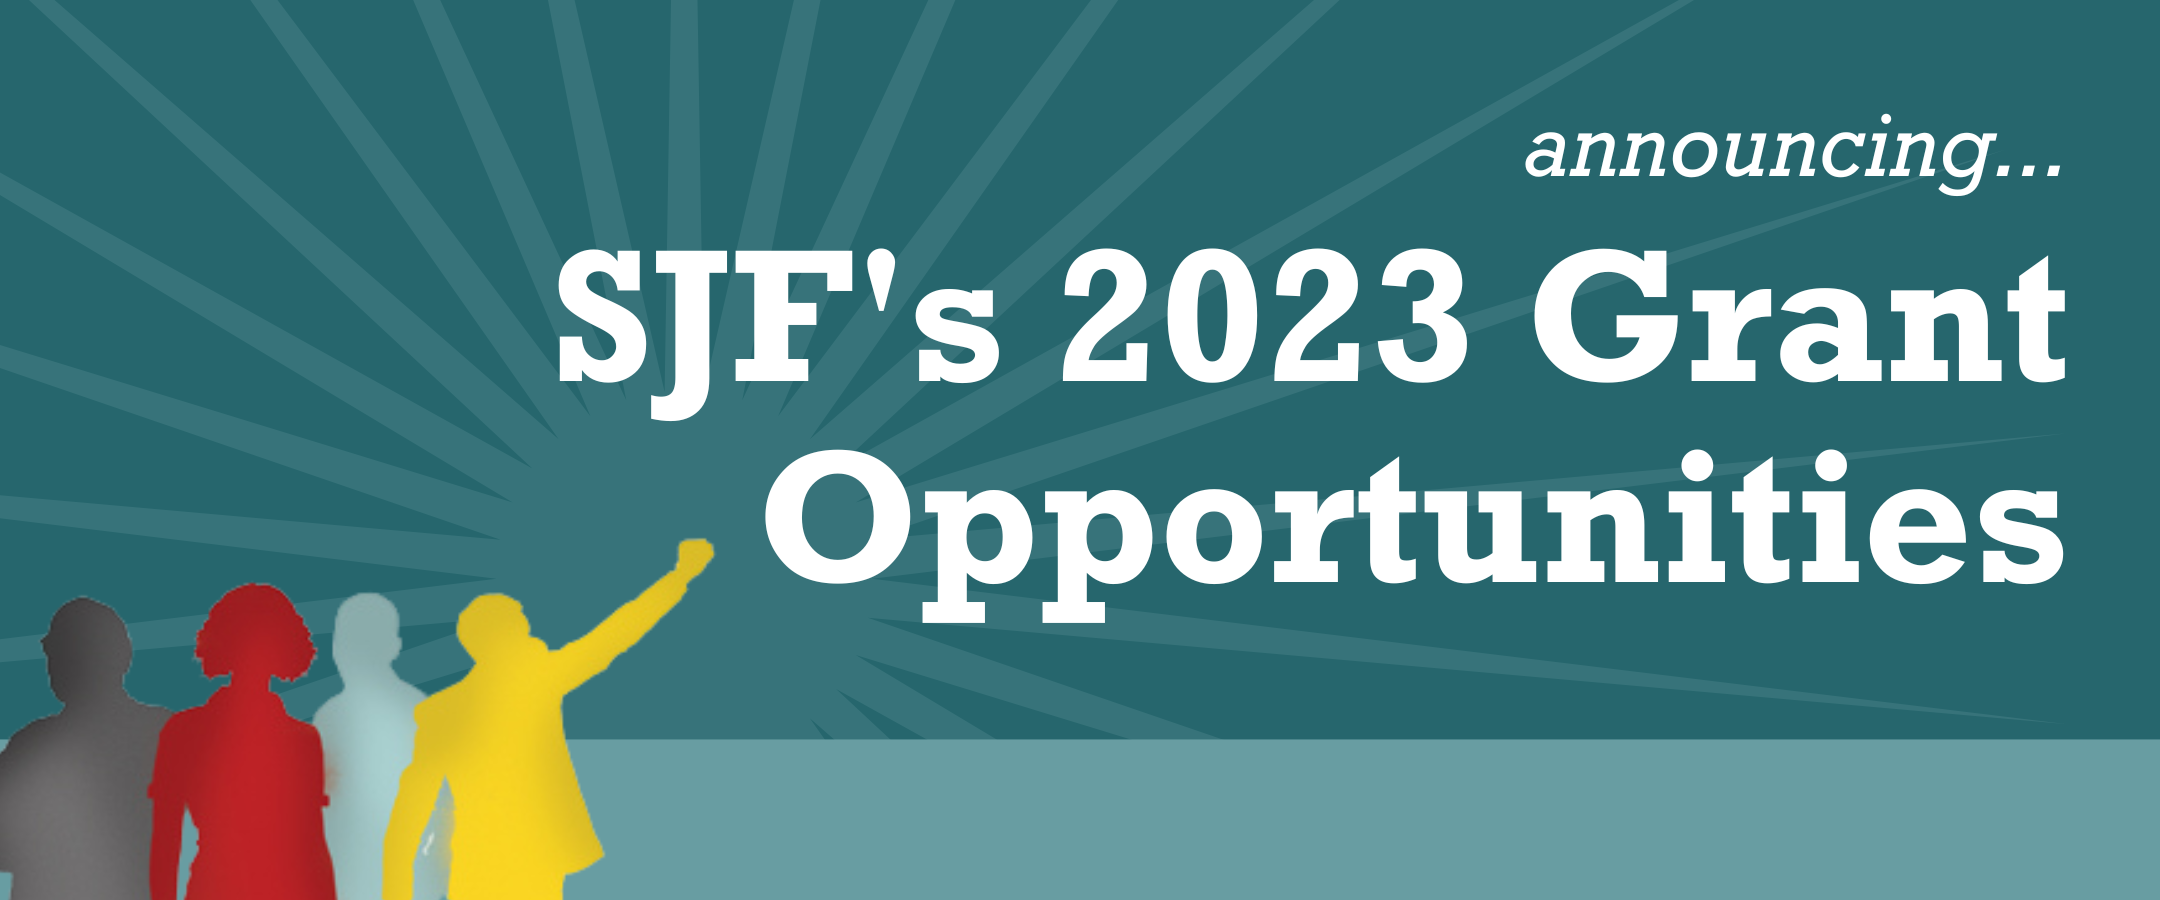 Banner image in dark and light teal with a sunburst in the background and SJFs logo in the bottom left corner. Text reads Announcing SJFs 2023 Grant Opportunities